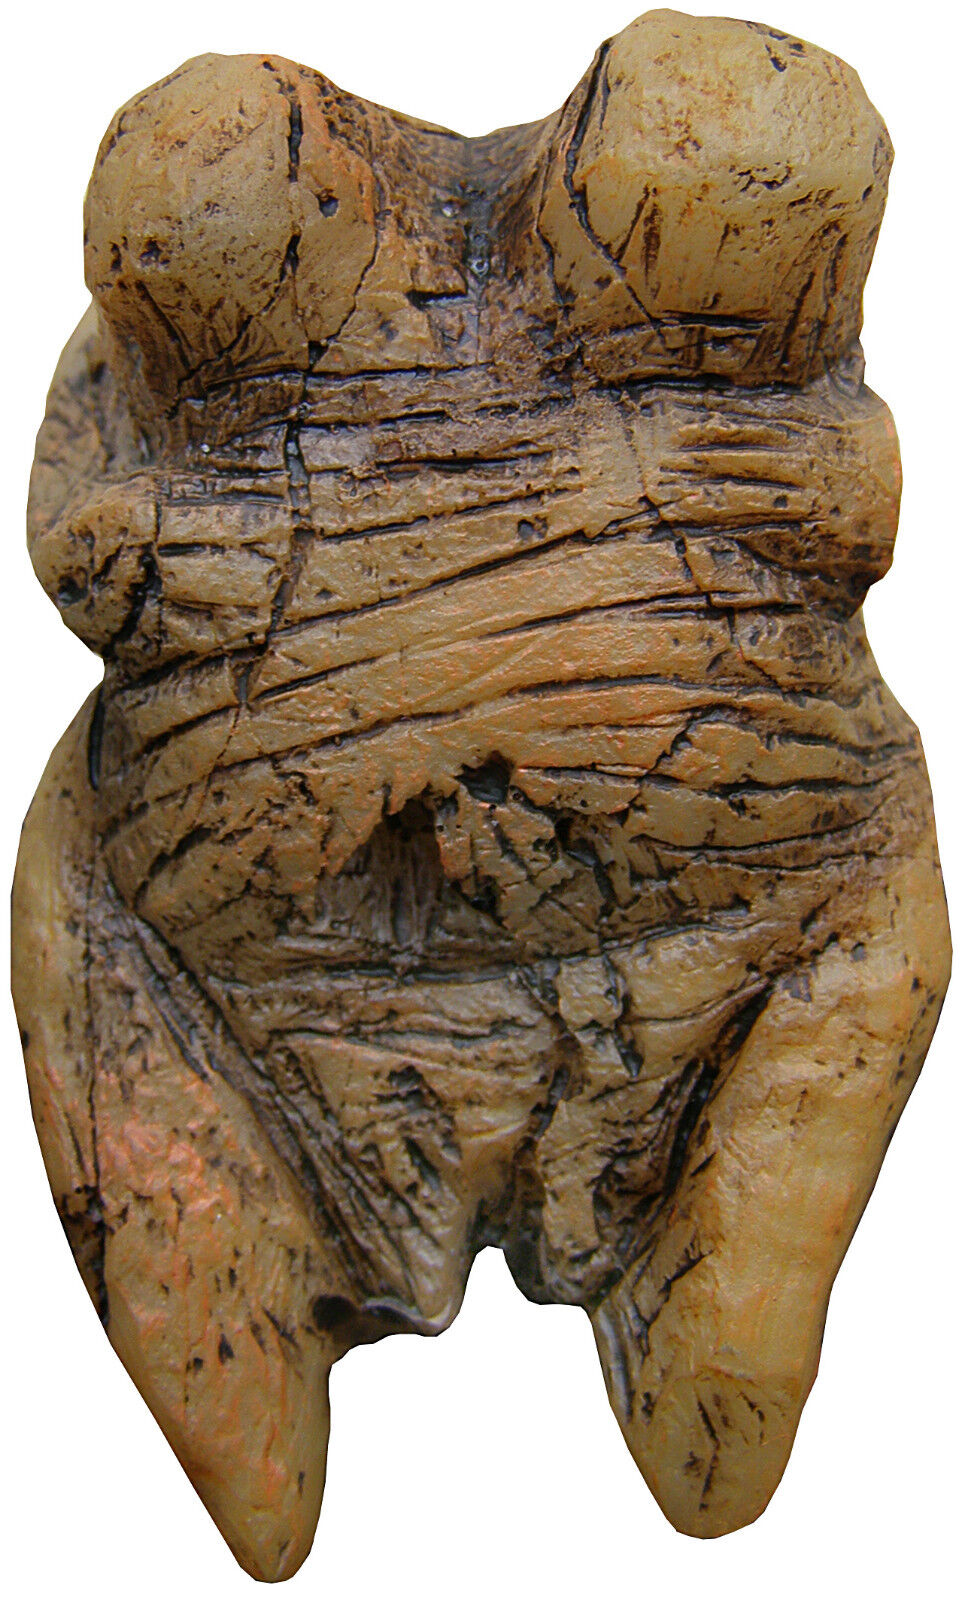 Venus from Hohle Fels cave (Germany) with pedestal - cast of resin